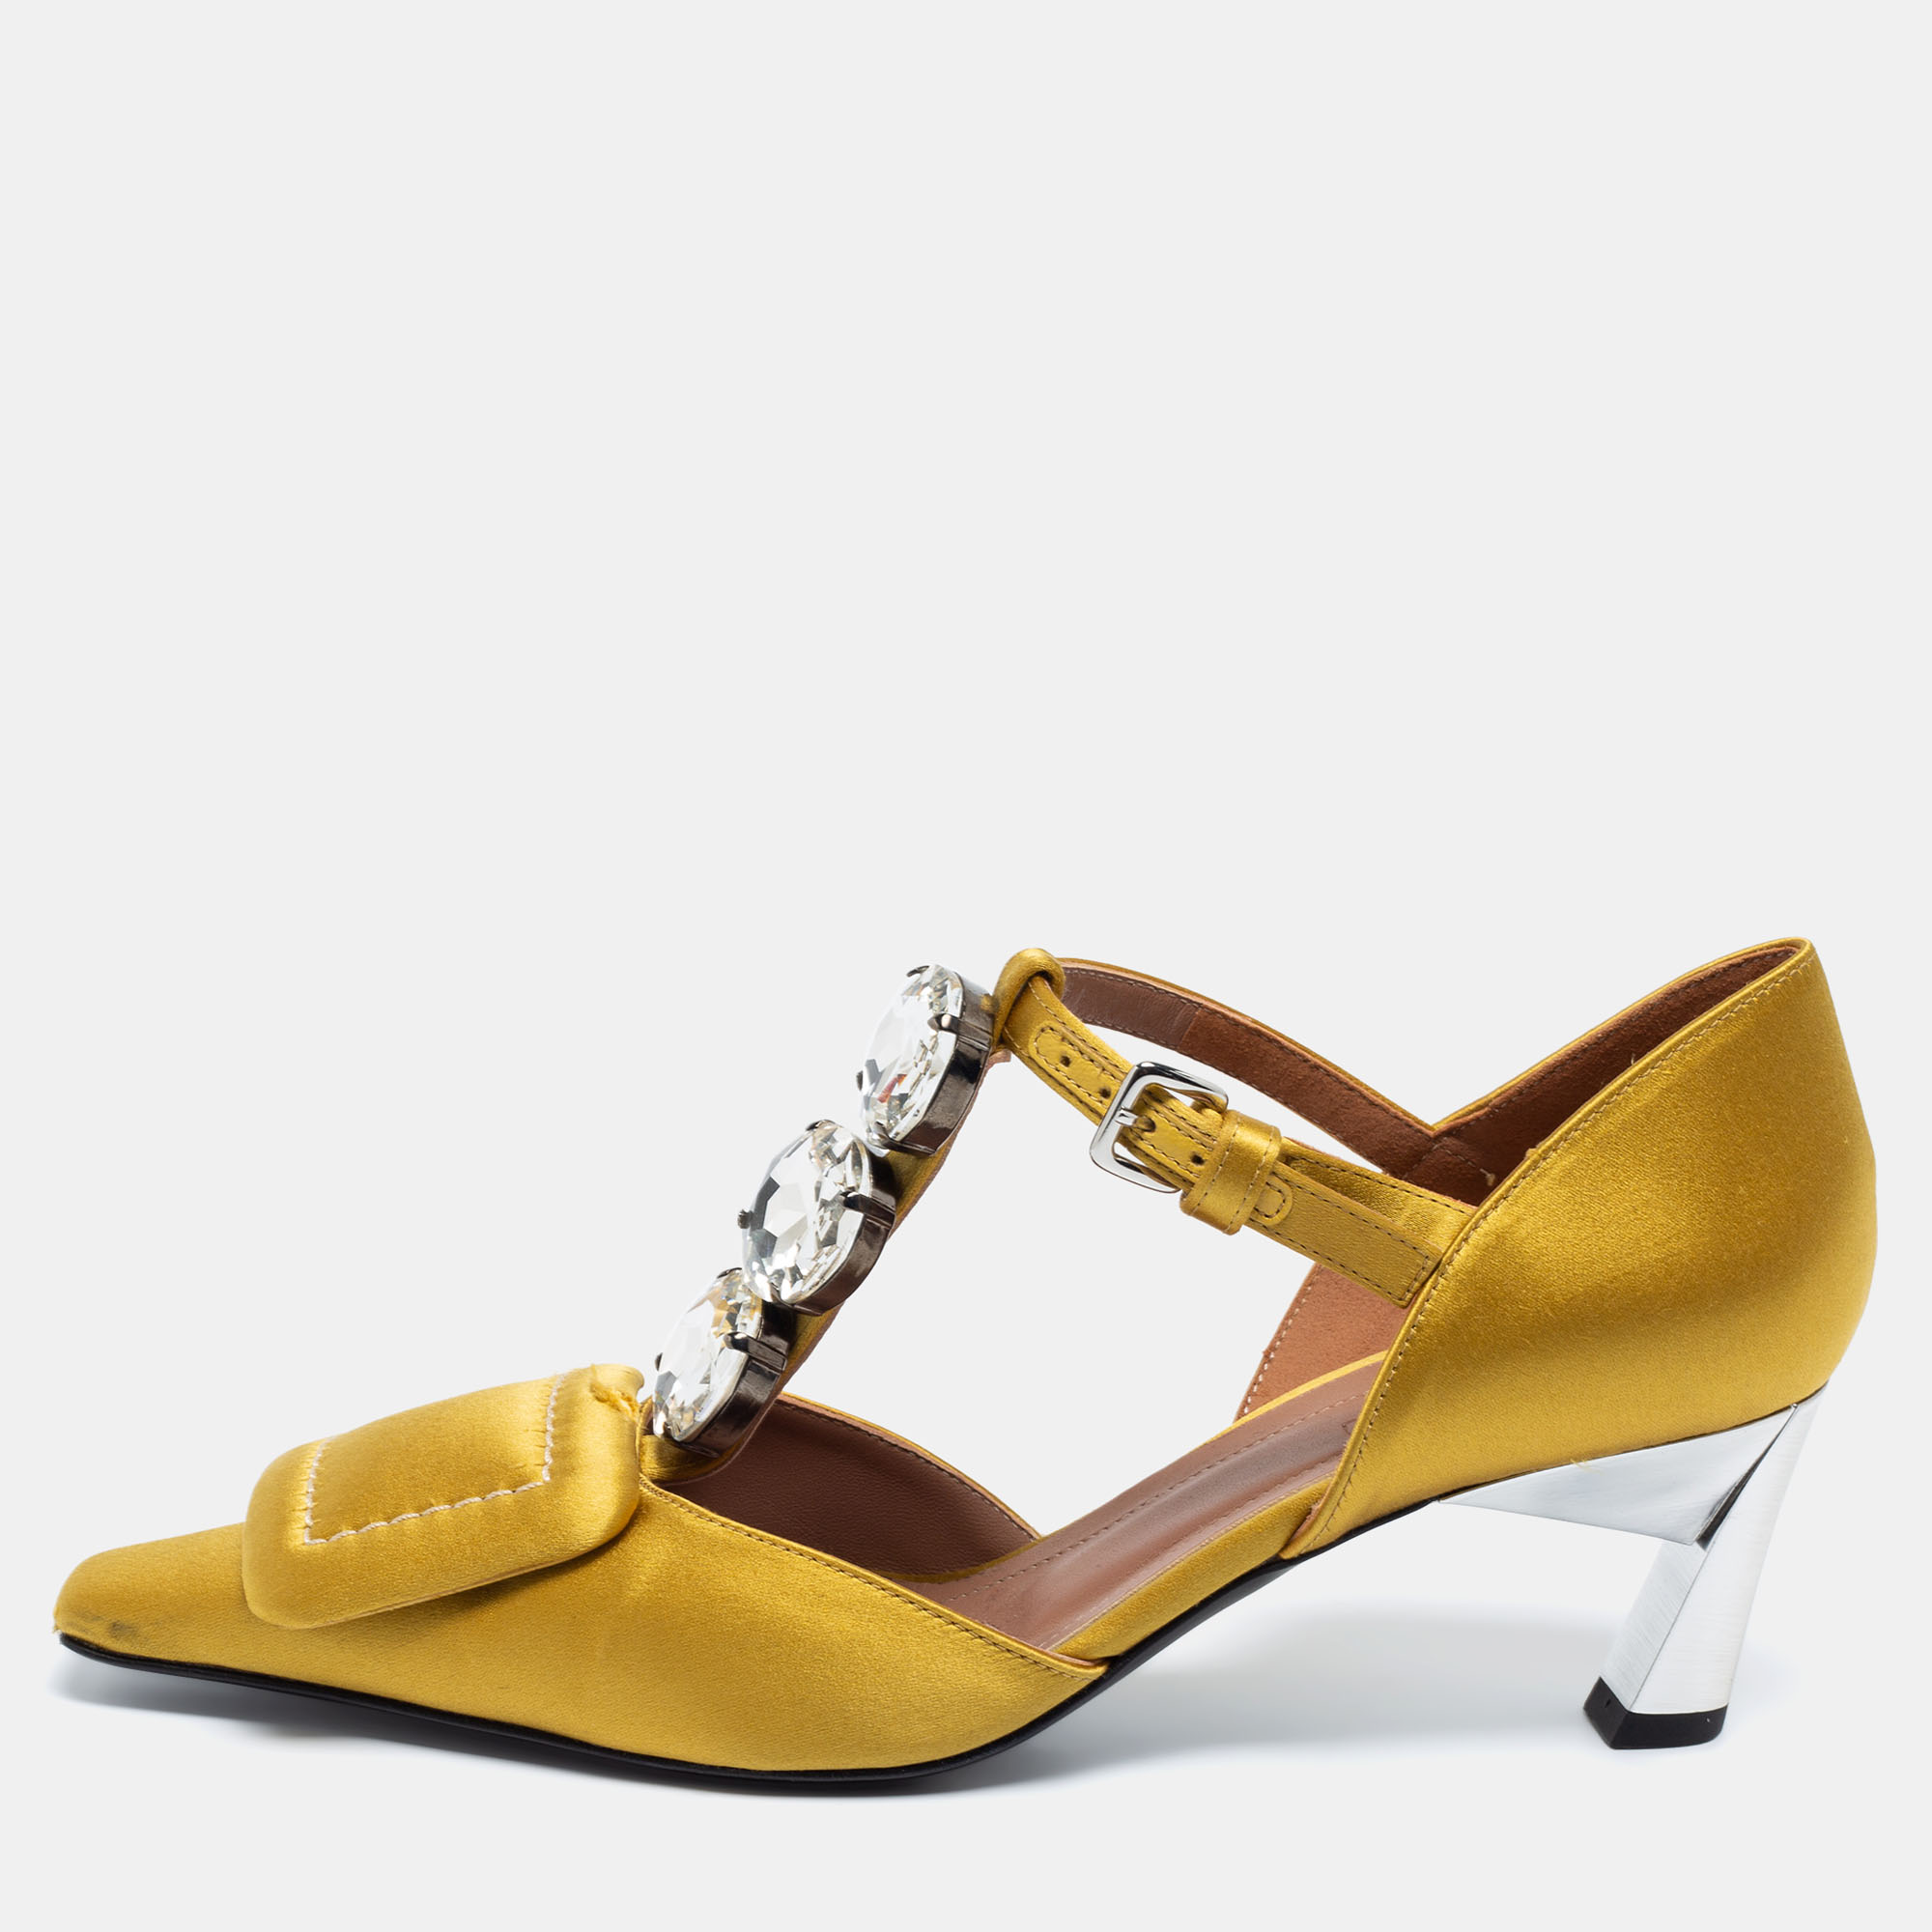 These pumps from the House of Marni will certainly make you look classy and polished They are created using yellow satin and display a crystal embellished T strap. They showcase 5.5 cm heels pointed toes and silver tone hardware. Look gorgeous as you wear these pumps